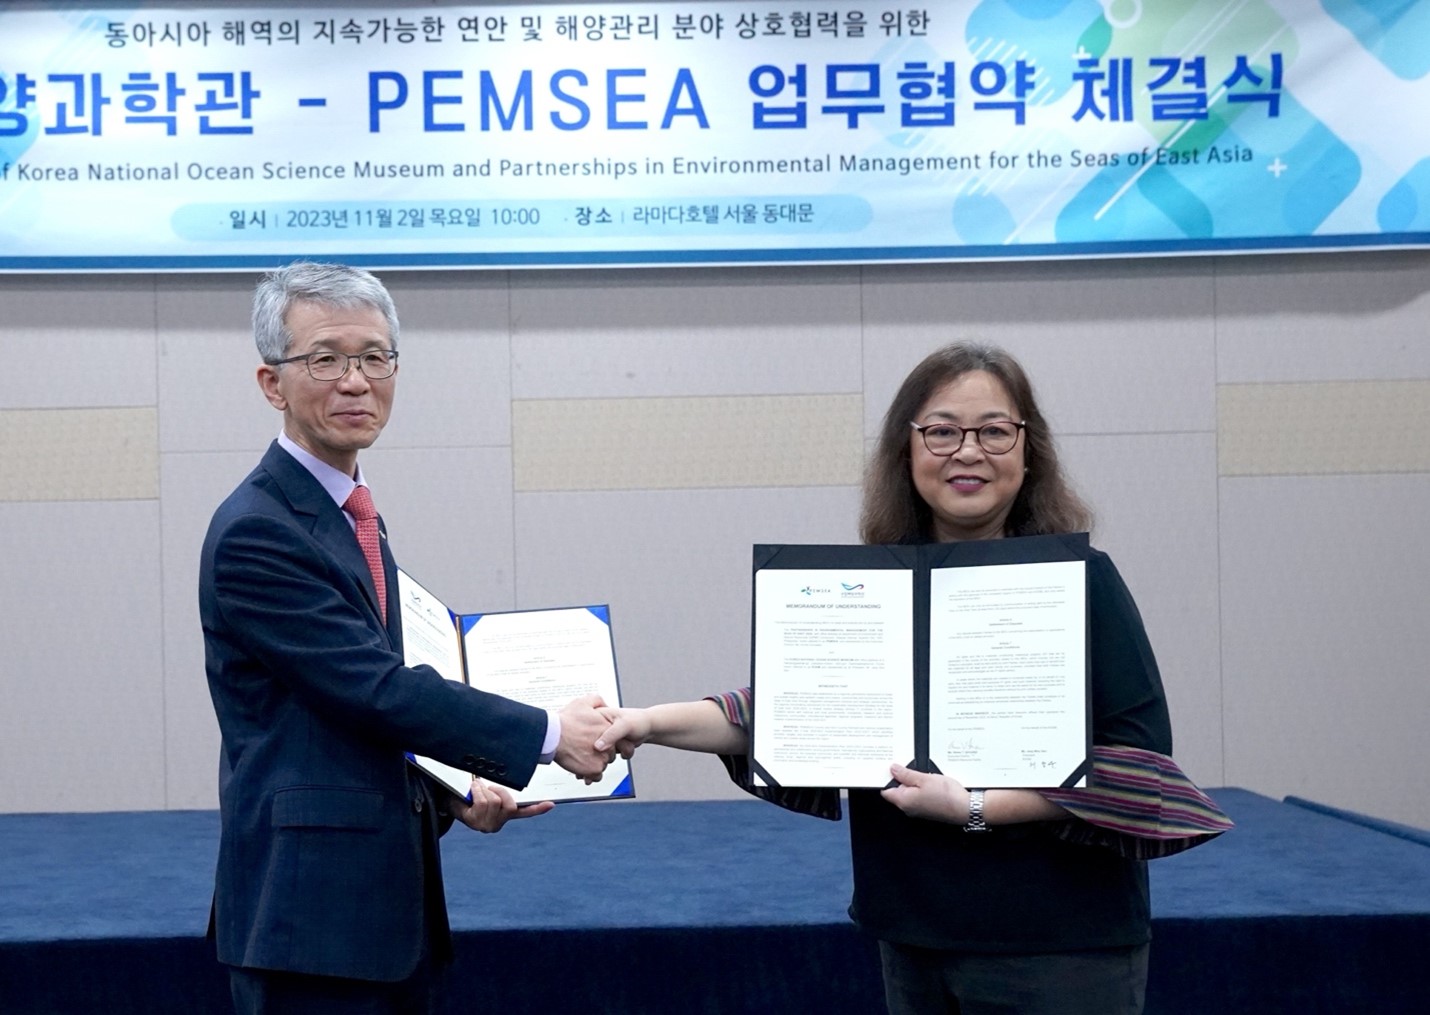 Republic of Korea supports youth engagement on climate solutions and marine conservation in East Asia